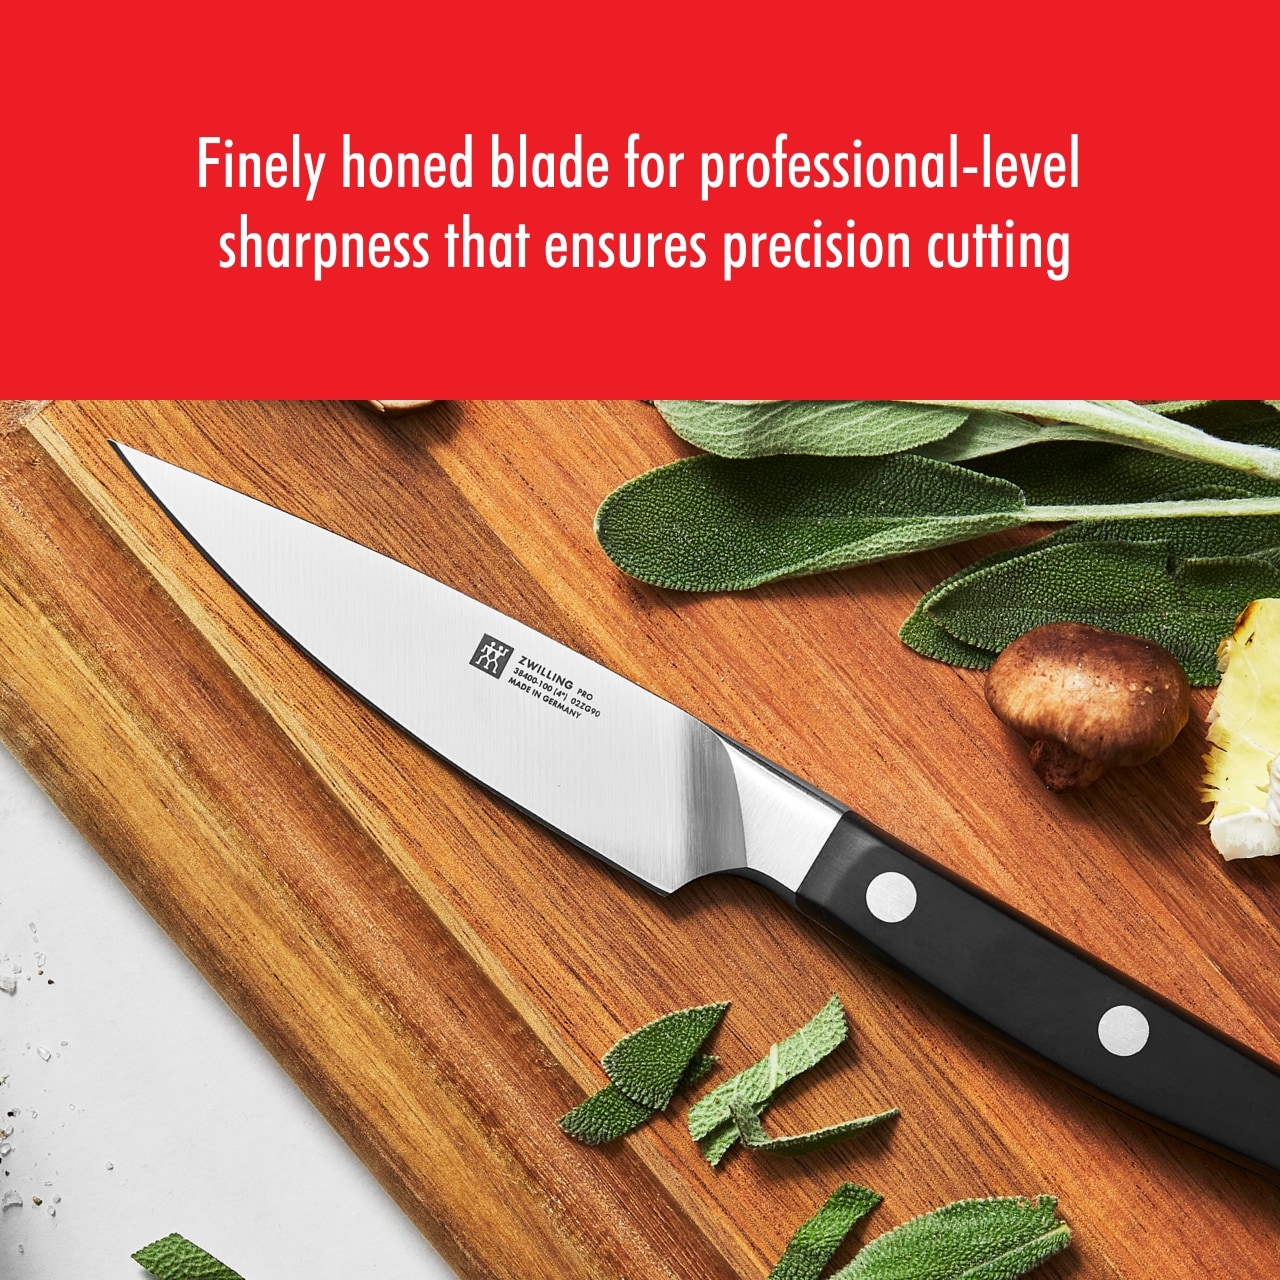 Zwilling Professional S 7-Piece Set With In-Drawer Knife Tray